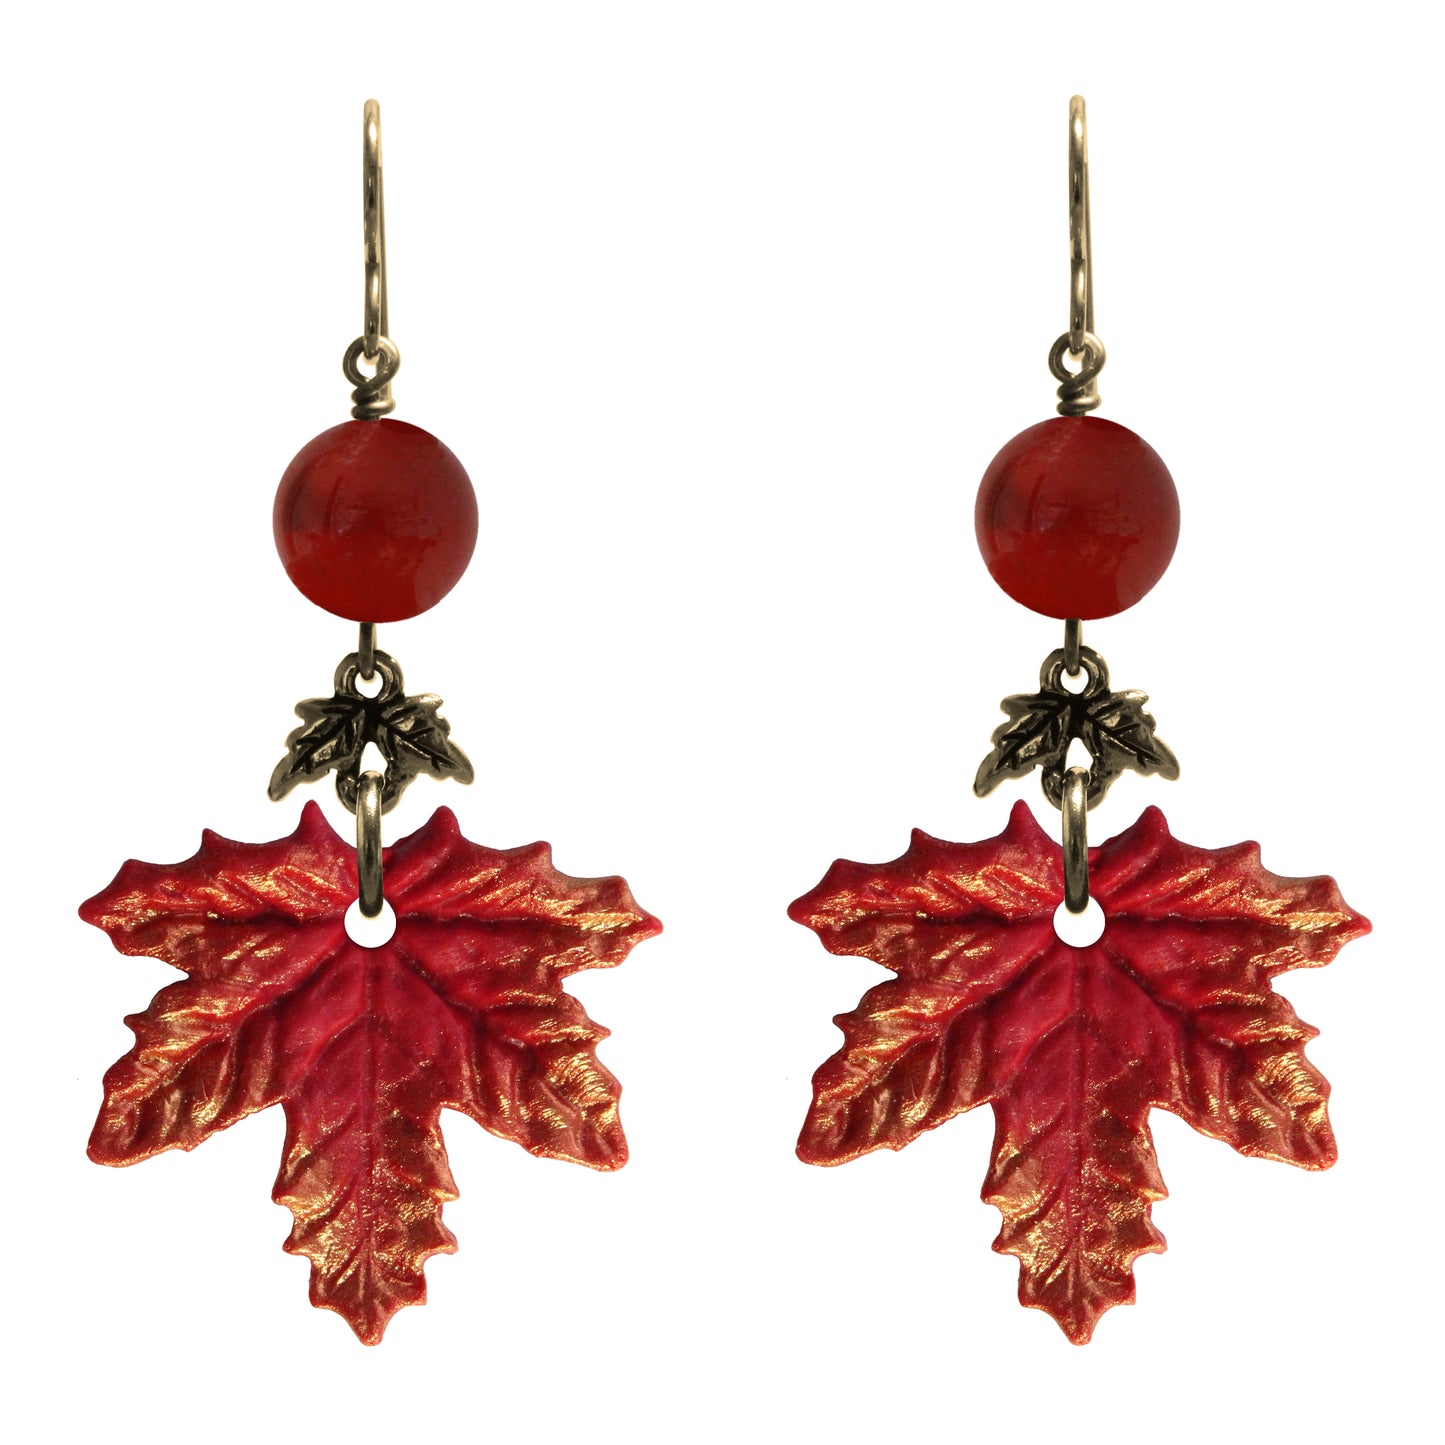 Autumn Red Maple Leaf Charm Earrings / gold filled hook earwires